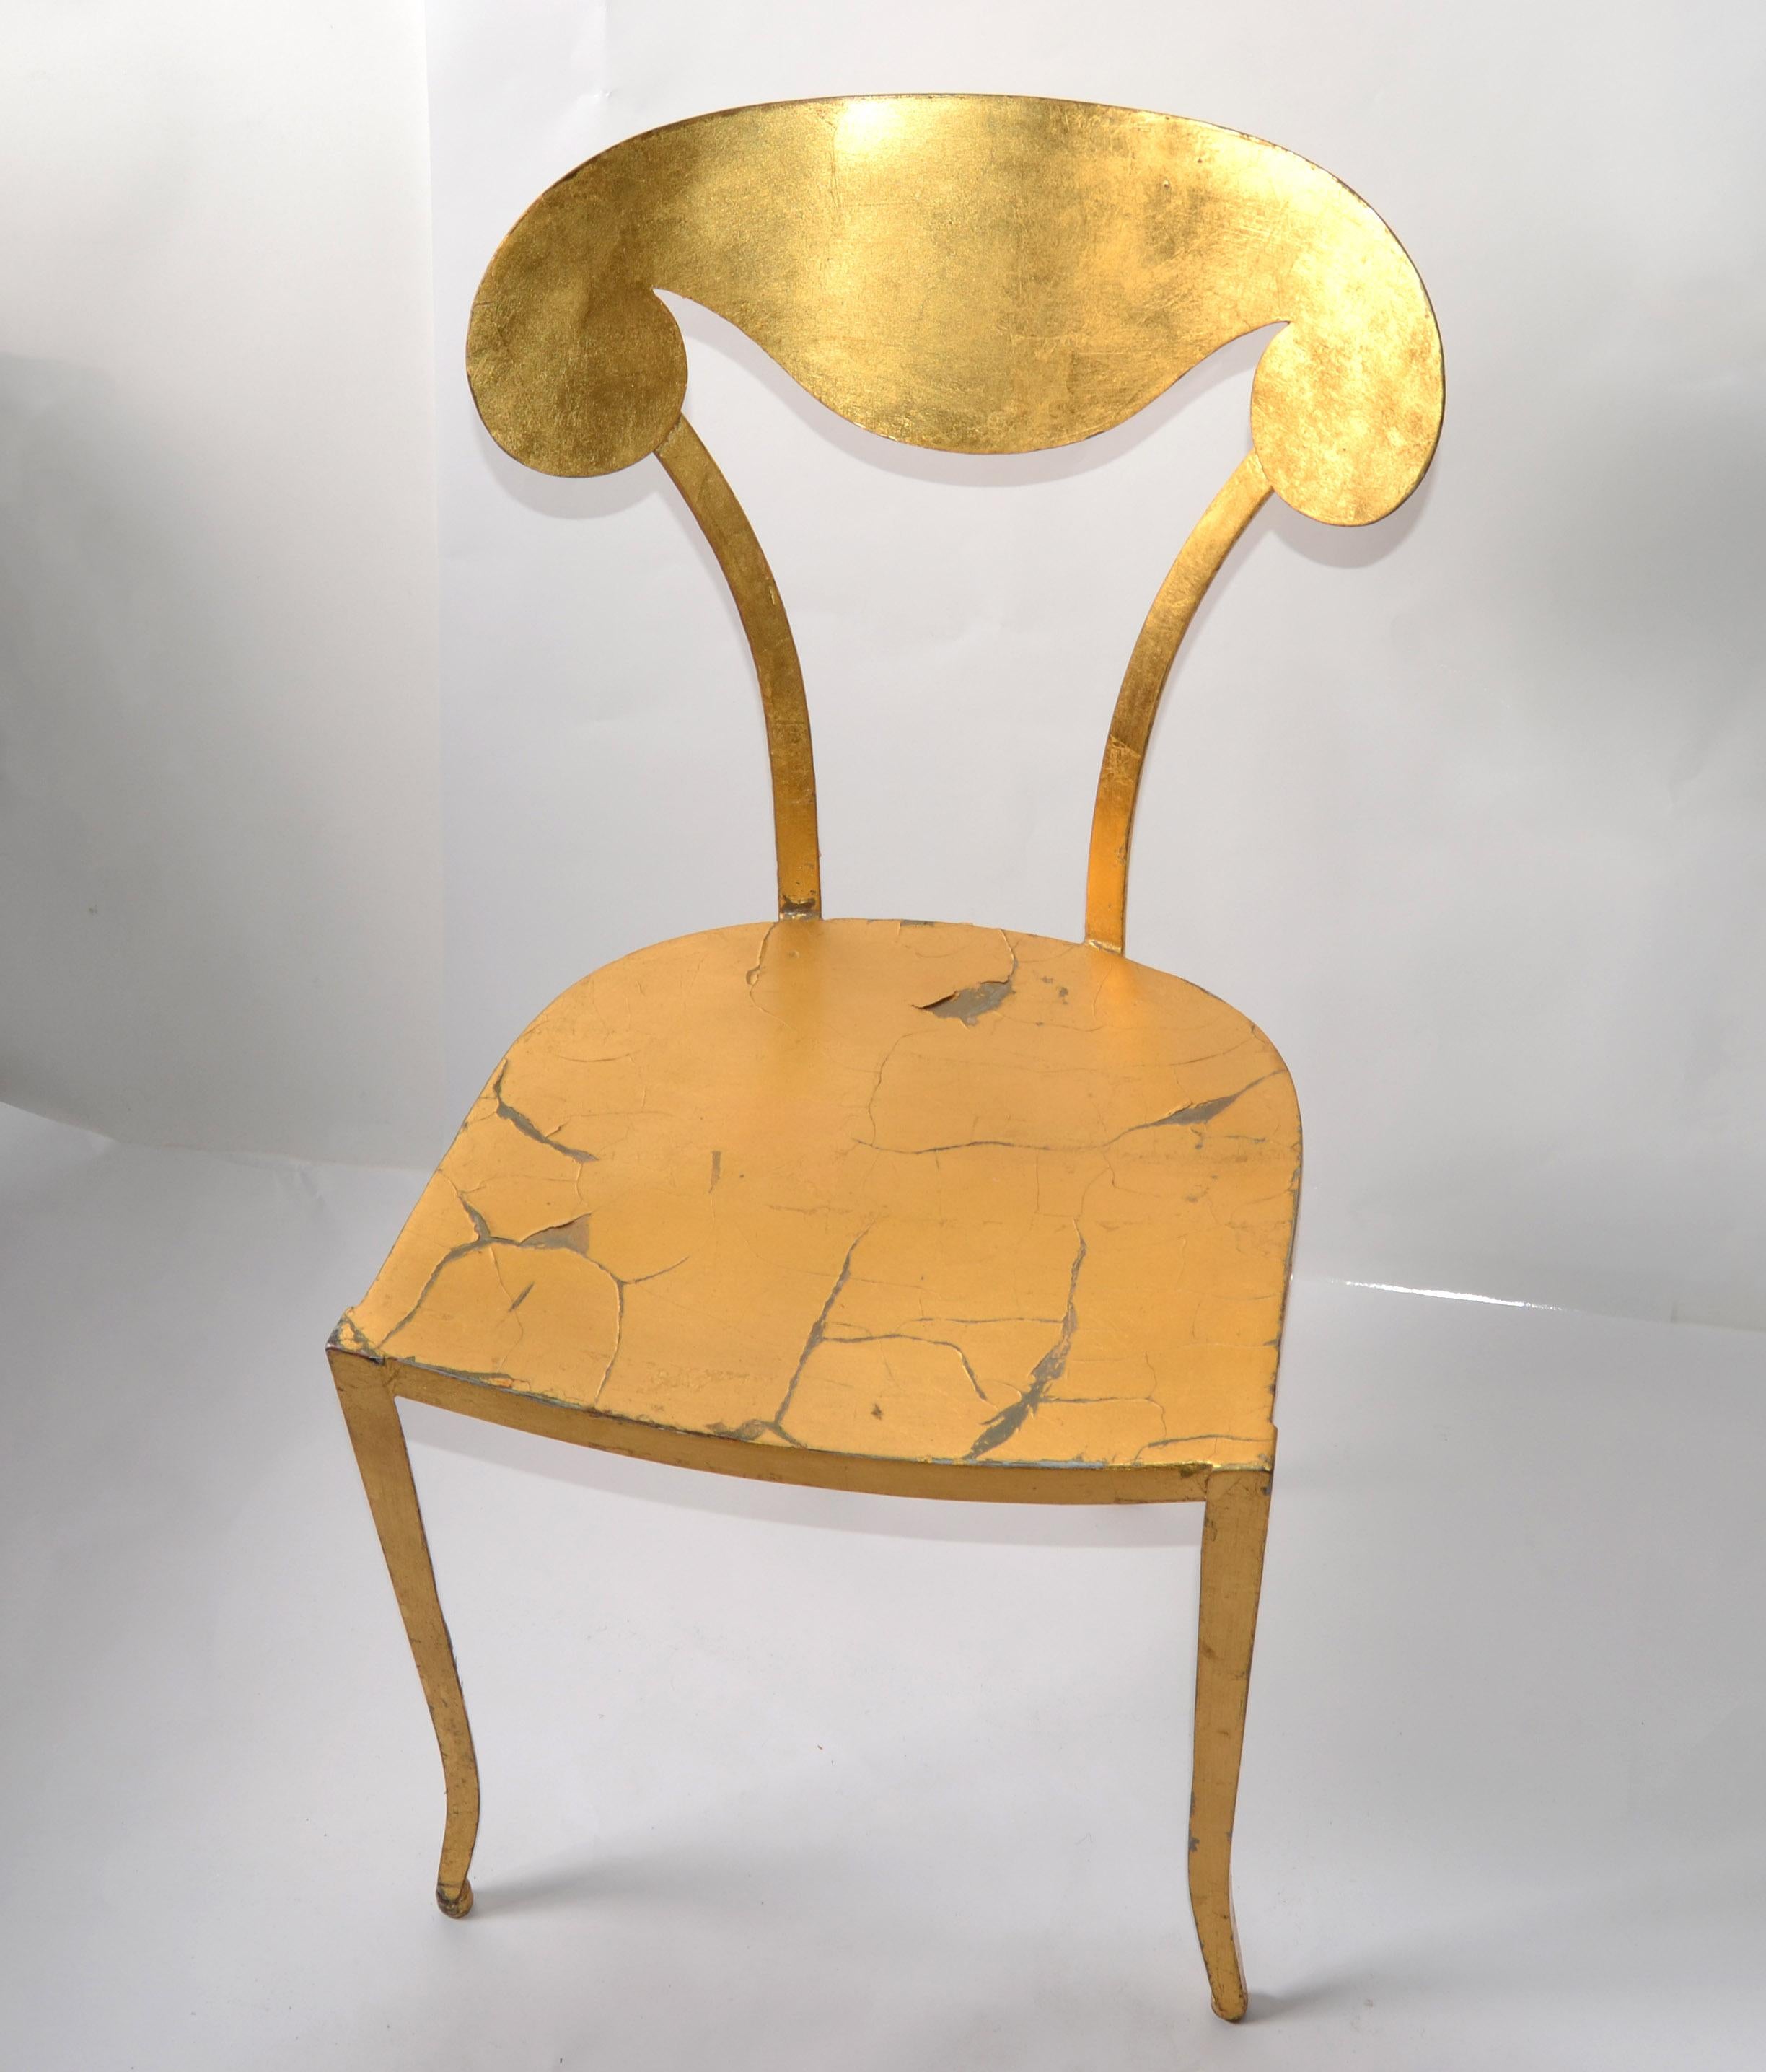 20th Century Italian Art Deco Style Sculptural Gilt Steel Vanity Desk Side Chair Distressed For Sale